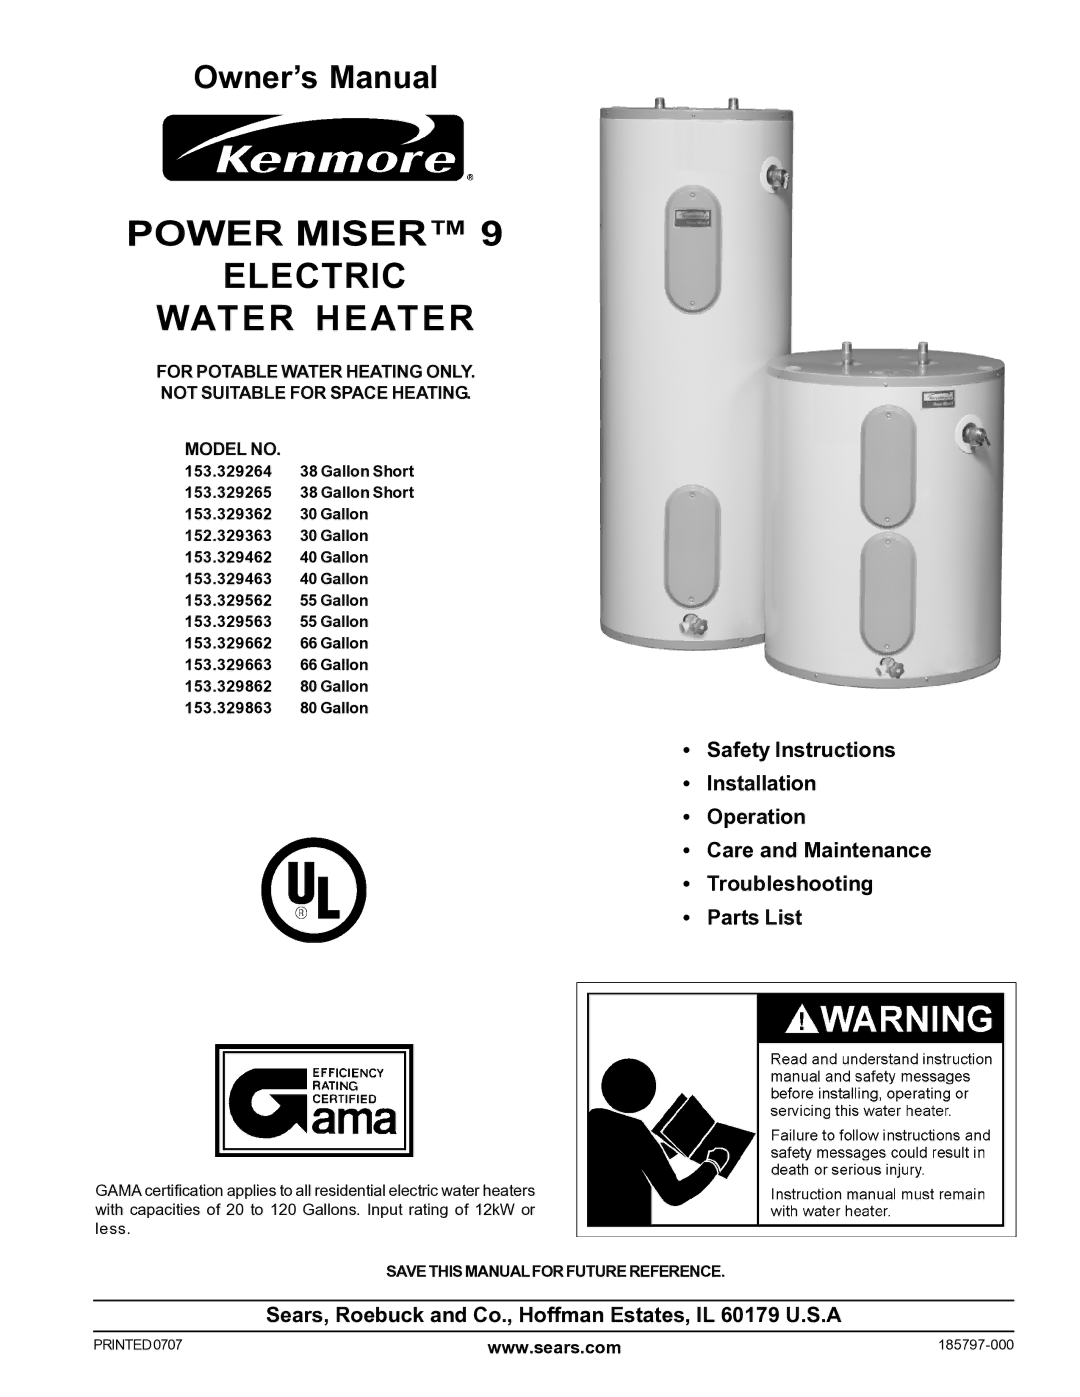 Sears 153.329264 owner manual Power Miser Electric Water Heater, Sears, Roebuck and Co., Hoffman Estates, IL 60179 U.S.A 